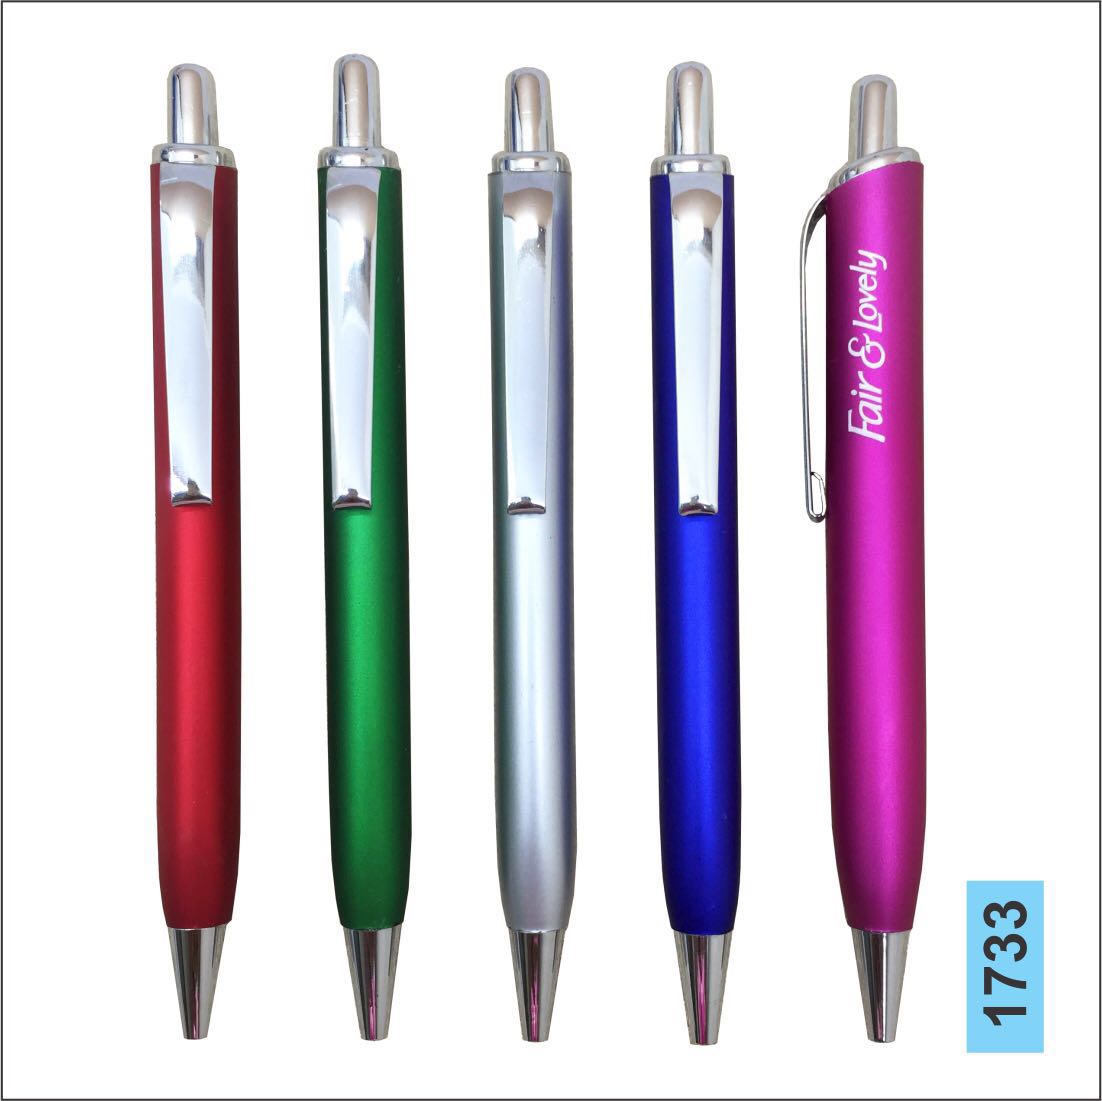 Power Bank Manufacturers in Hyderabad